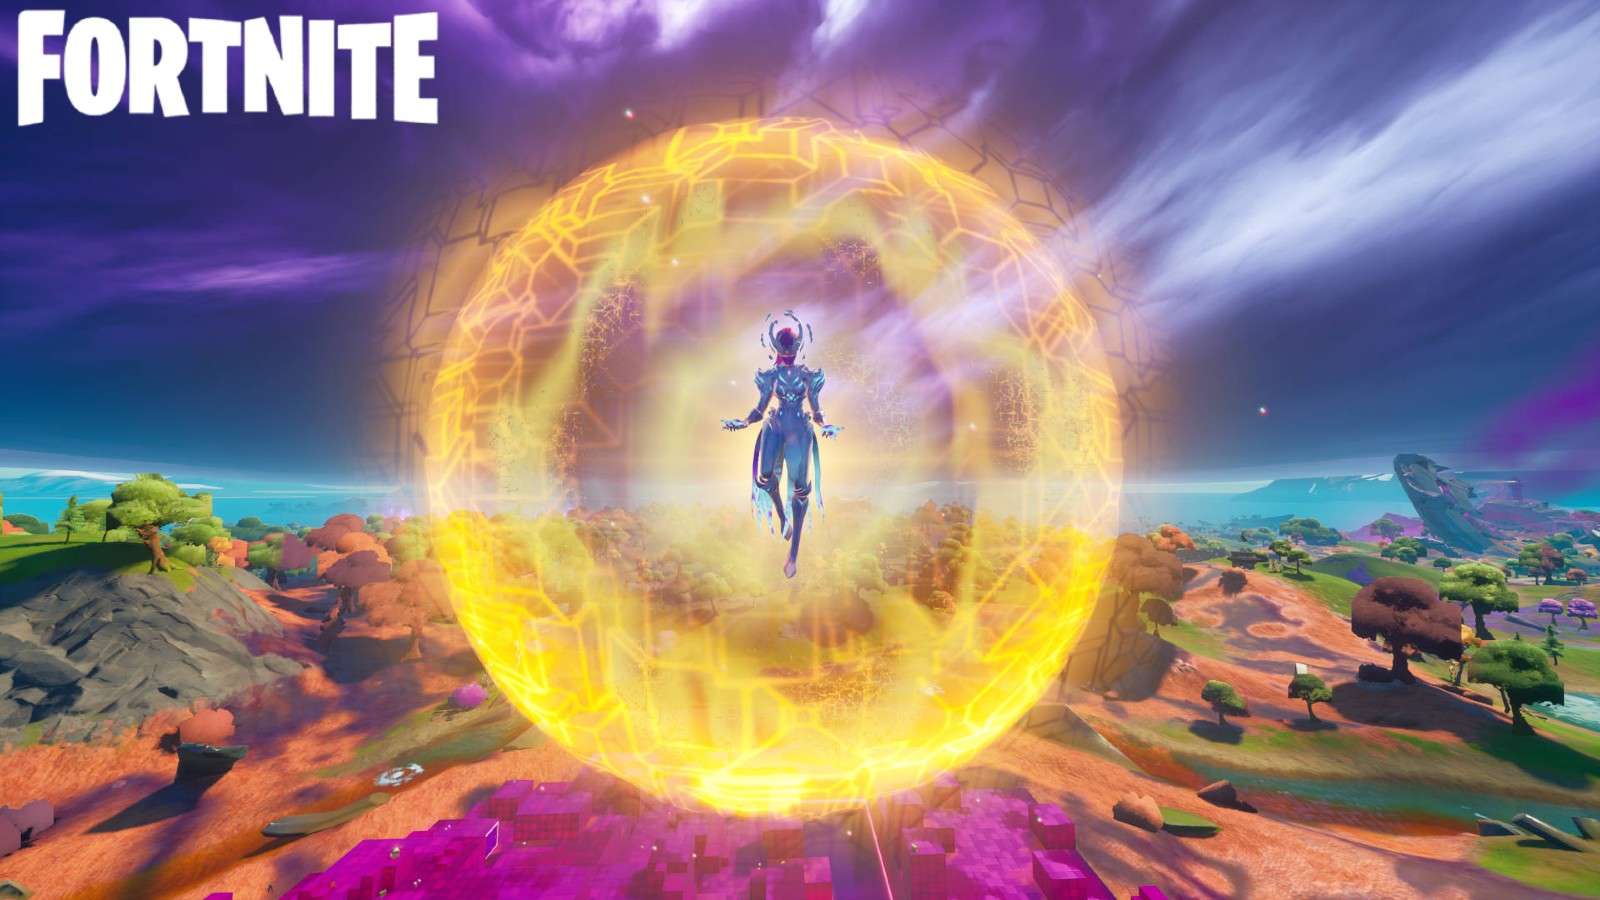 had a dream that the next fortnite season got leaked and this was